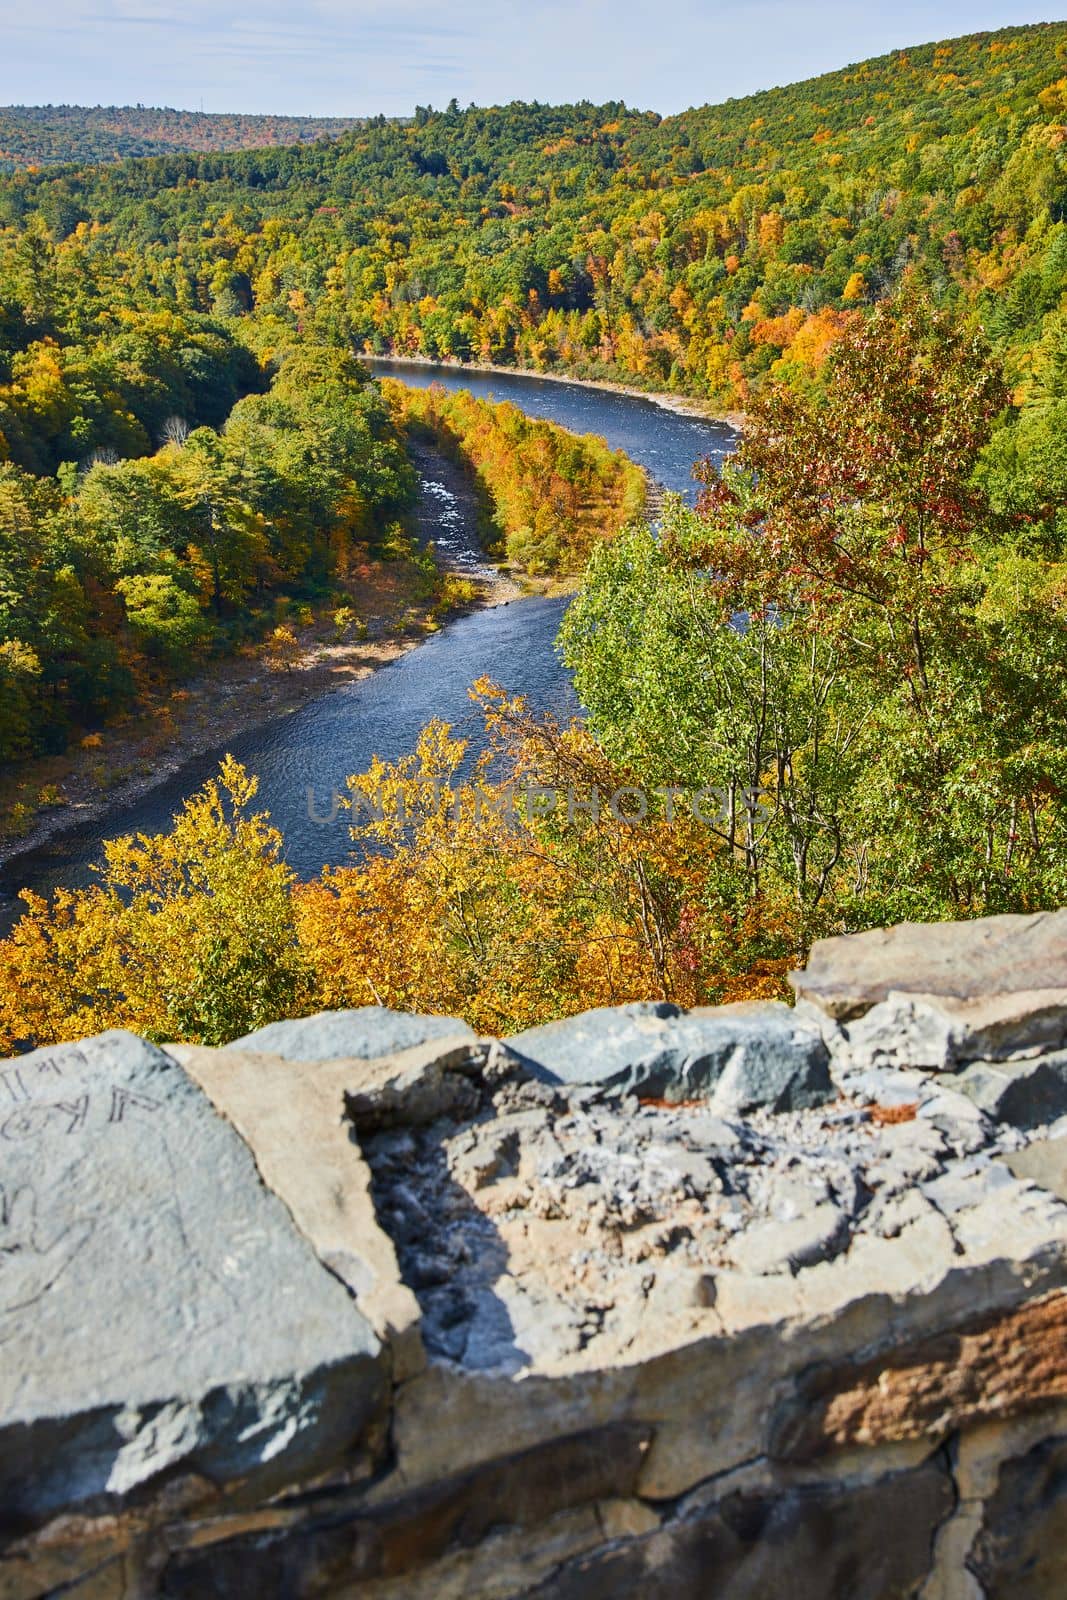 Image of Damaged stone wall overlooking Delaware River winding through early fall forest